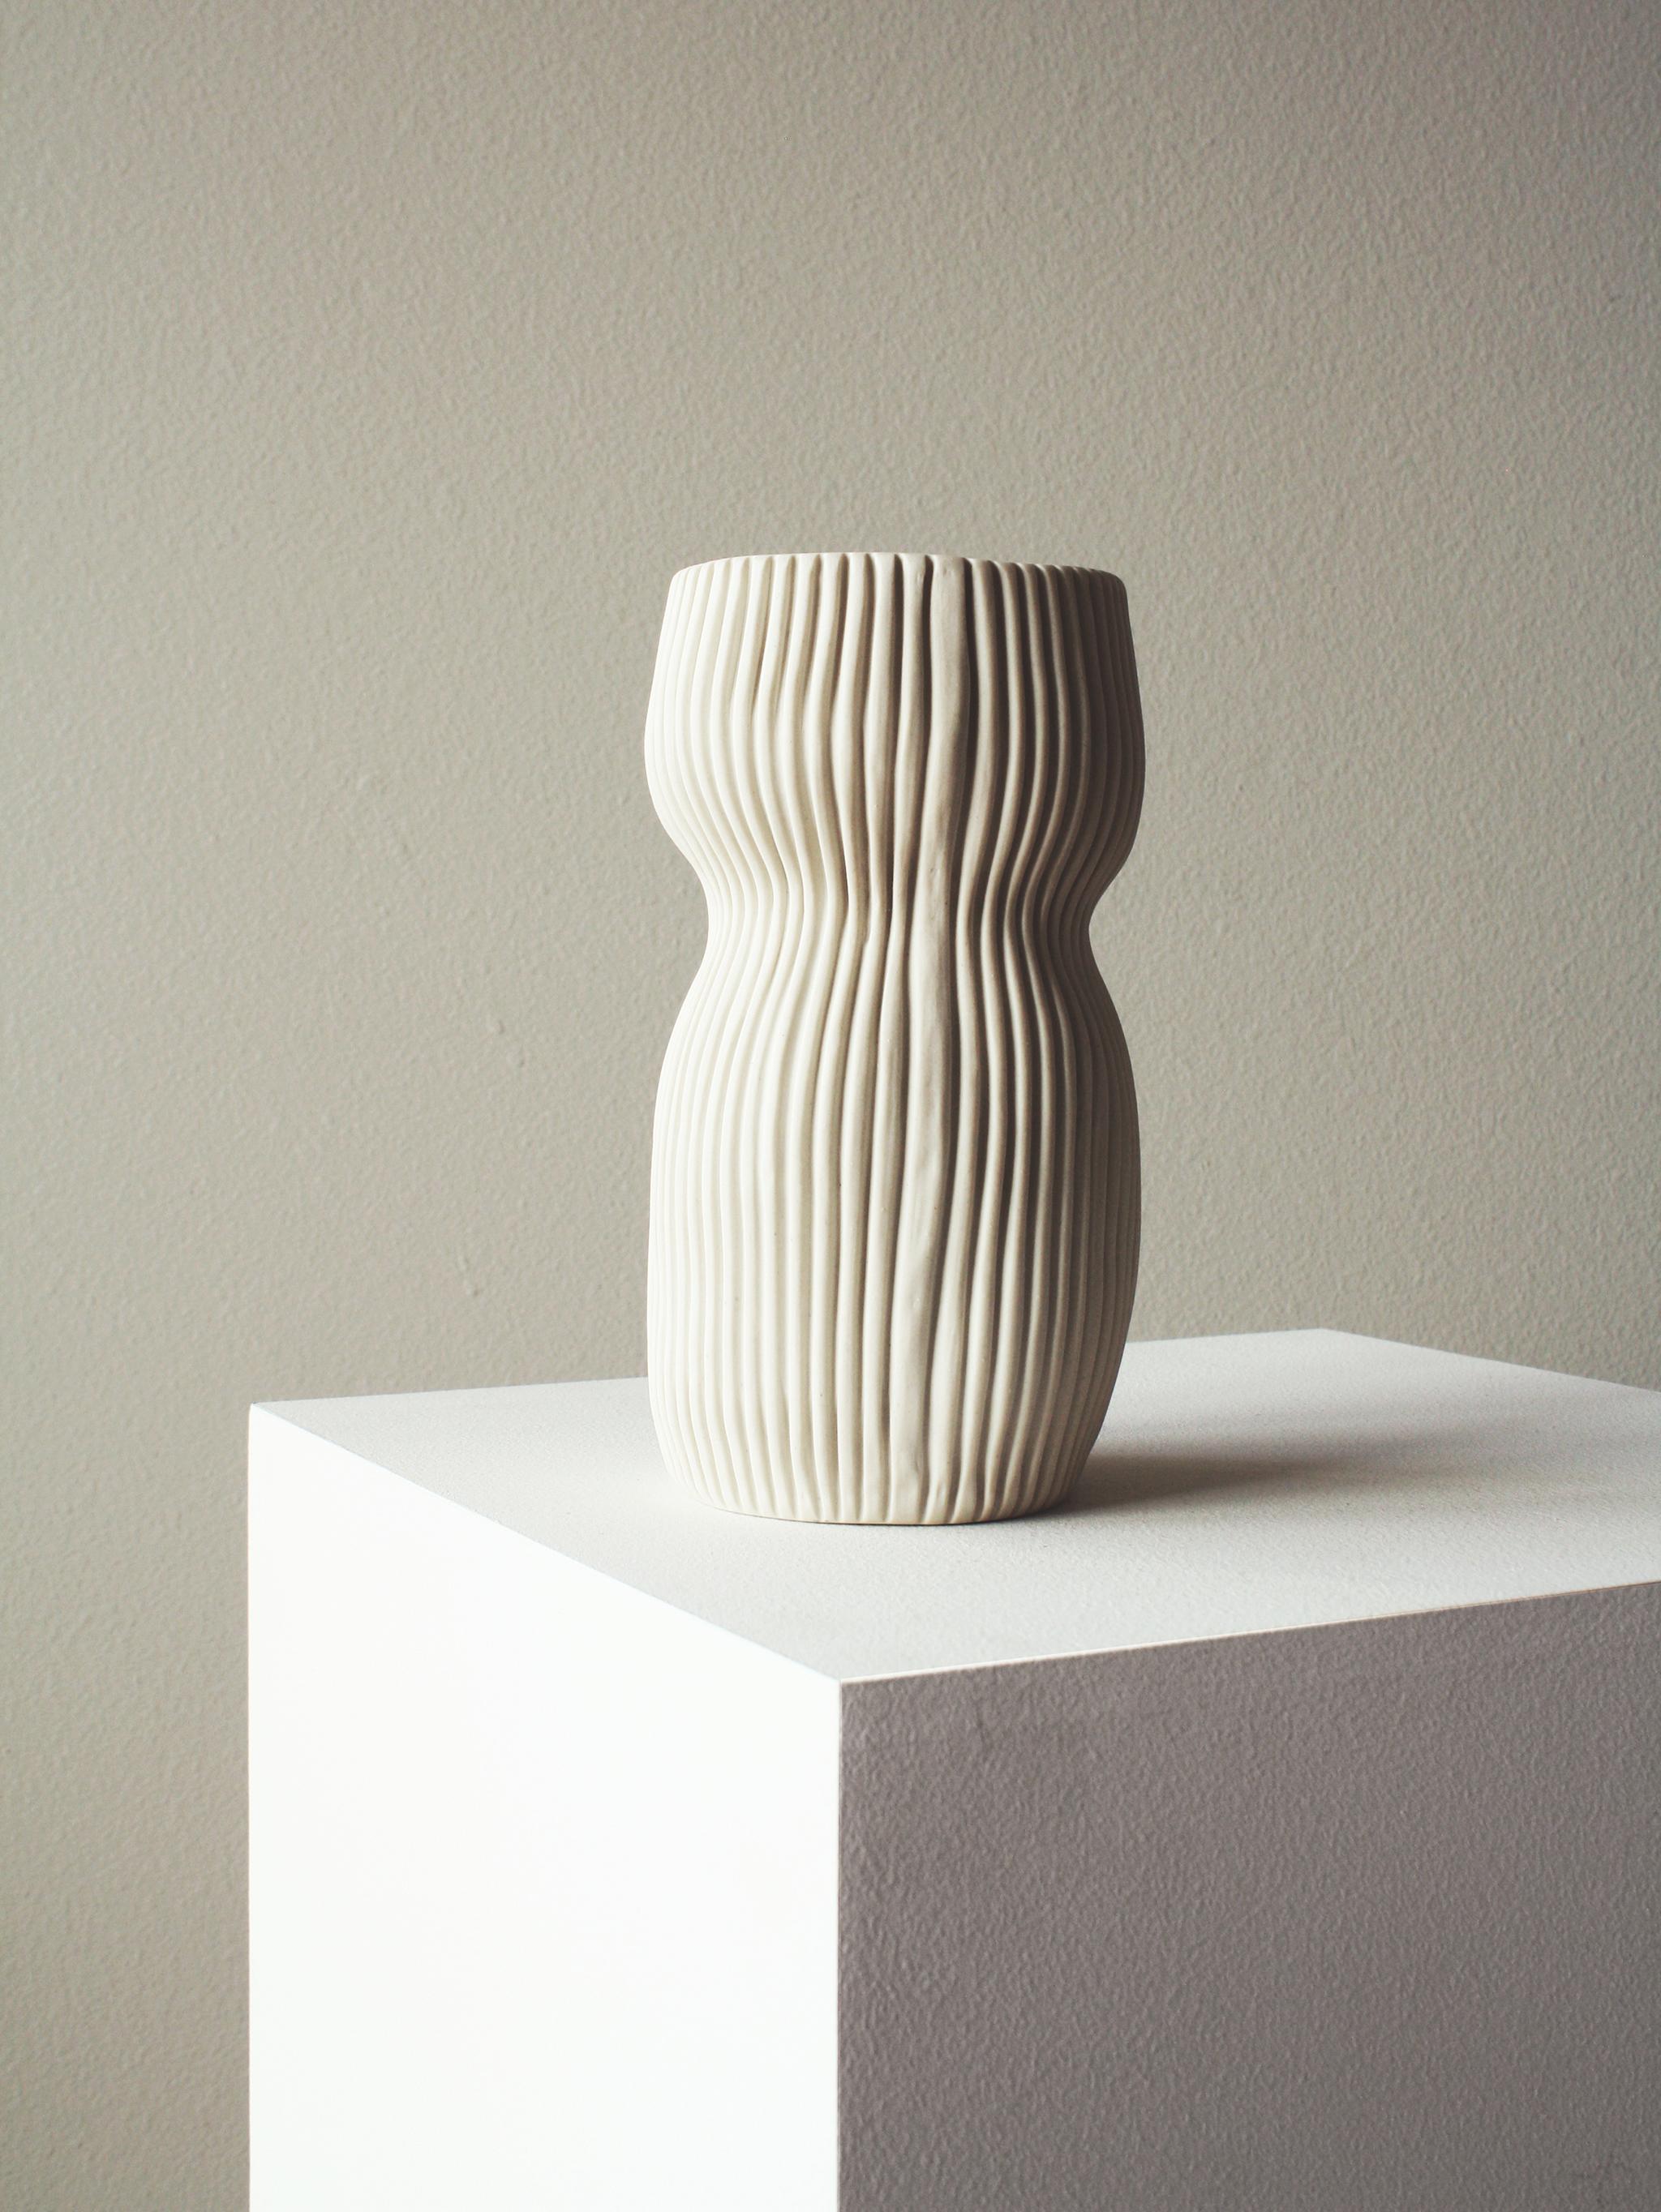 Hand-Crafted Pair of Curvy Textured White Porcelain Vases, by Cym Warkov For Sale